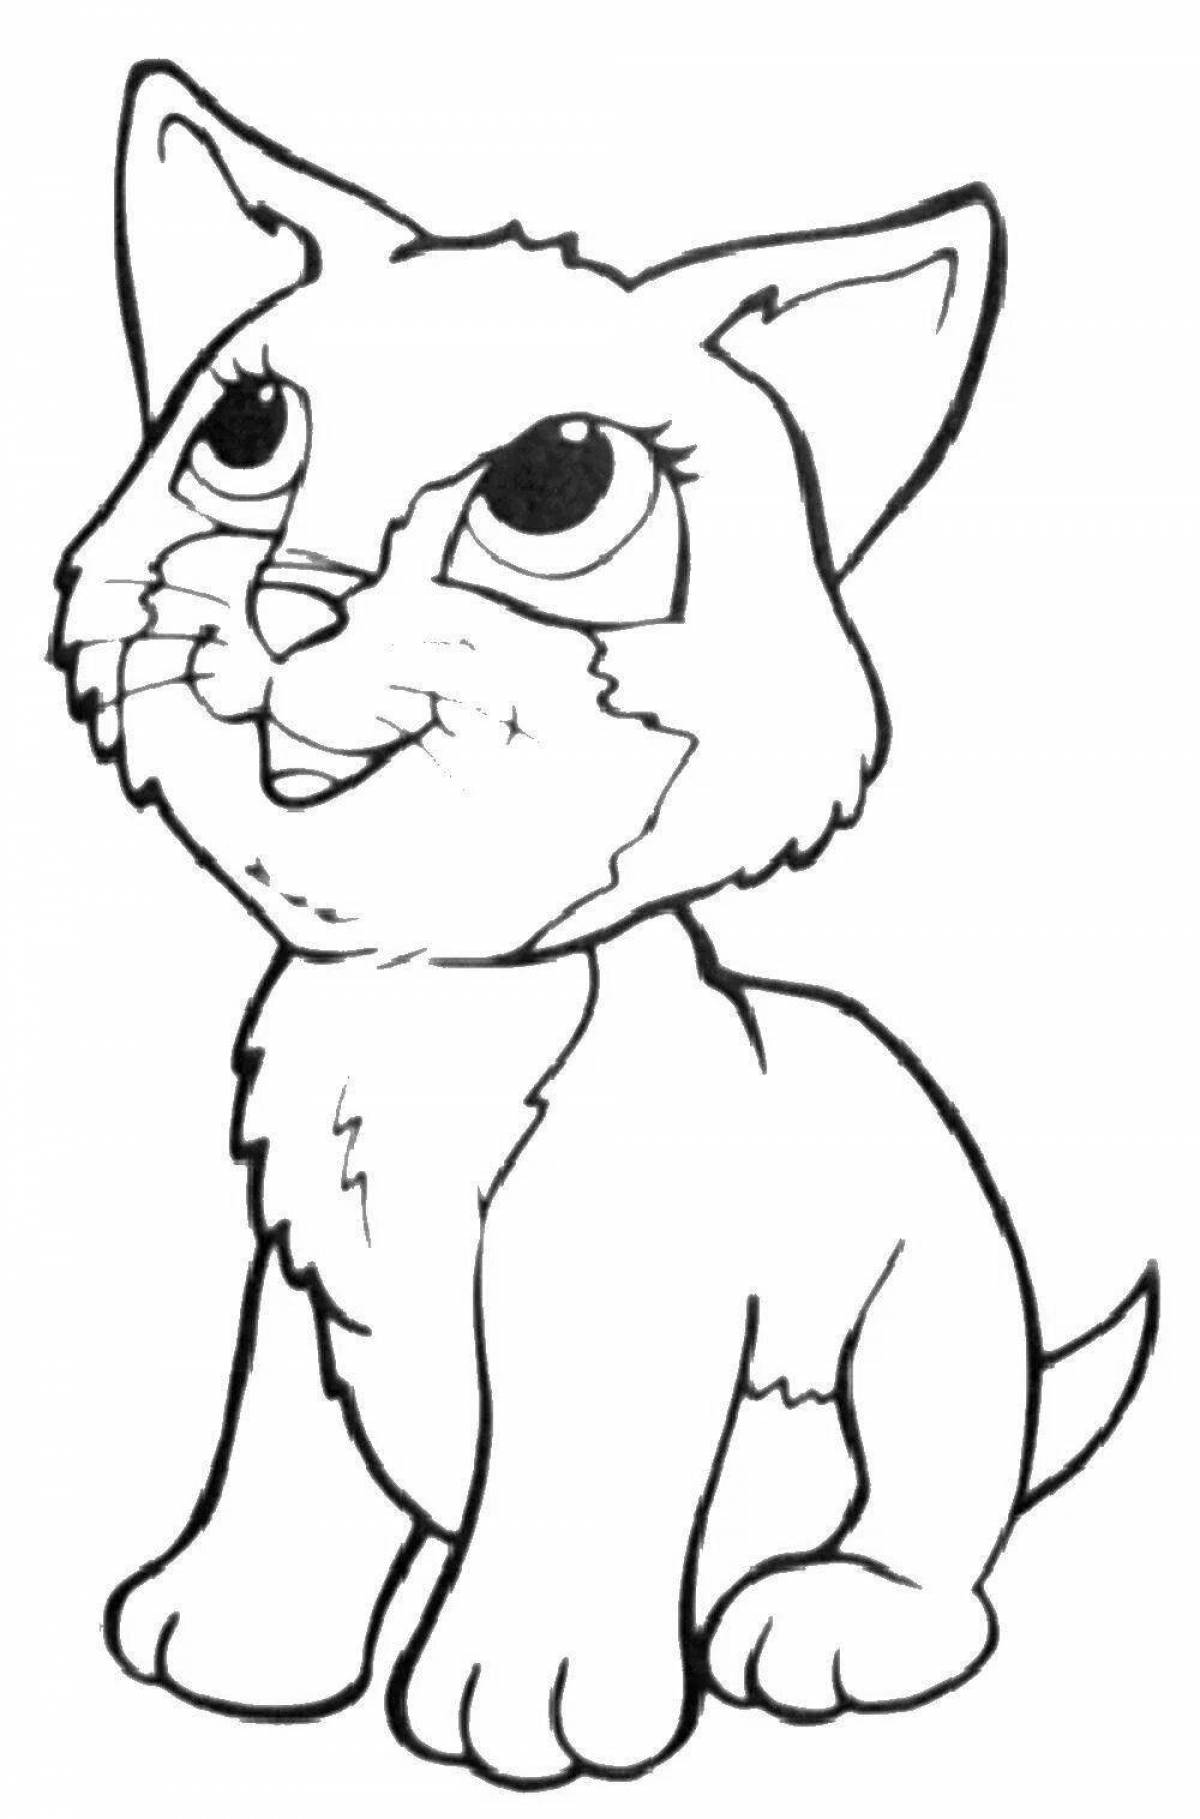 Coloring page affectionate cat and puppy